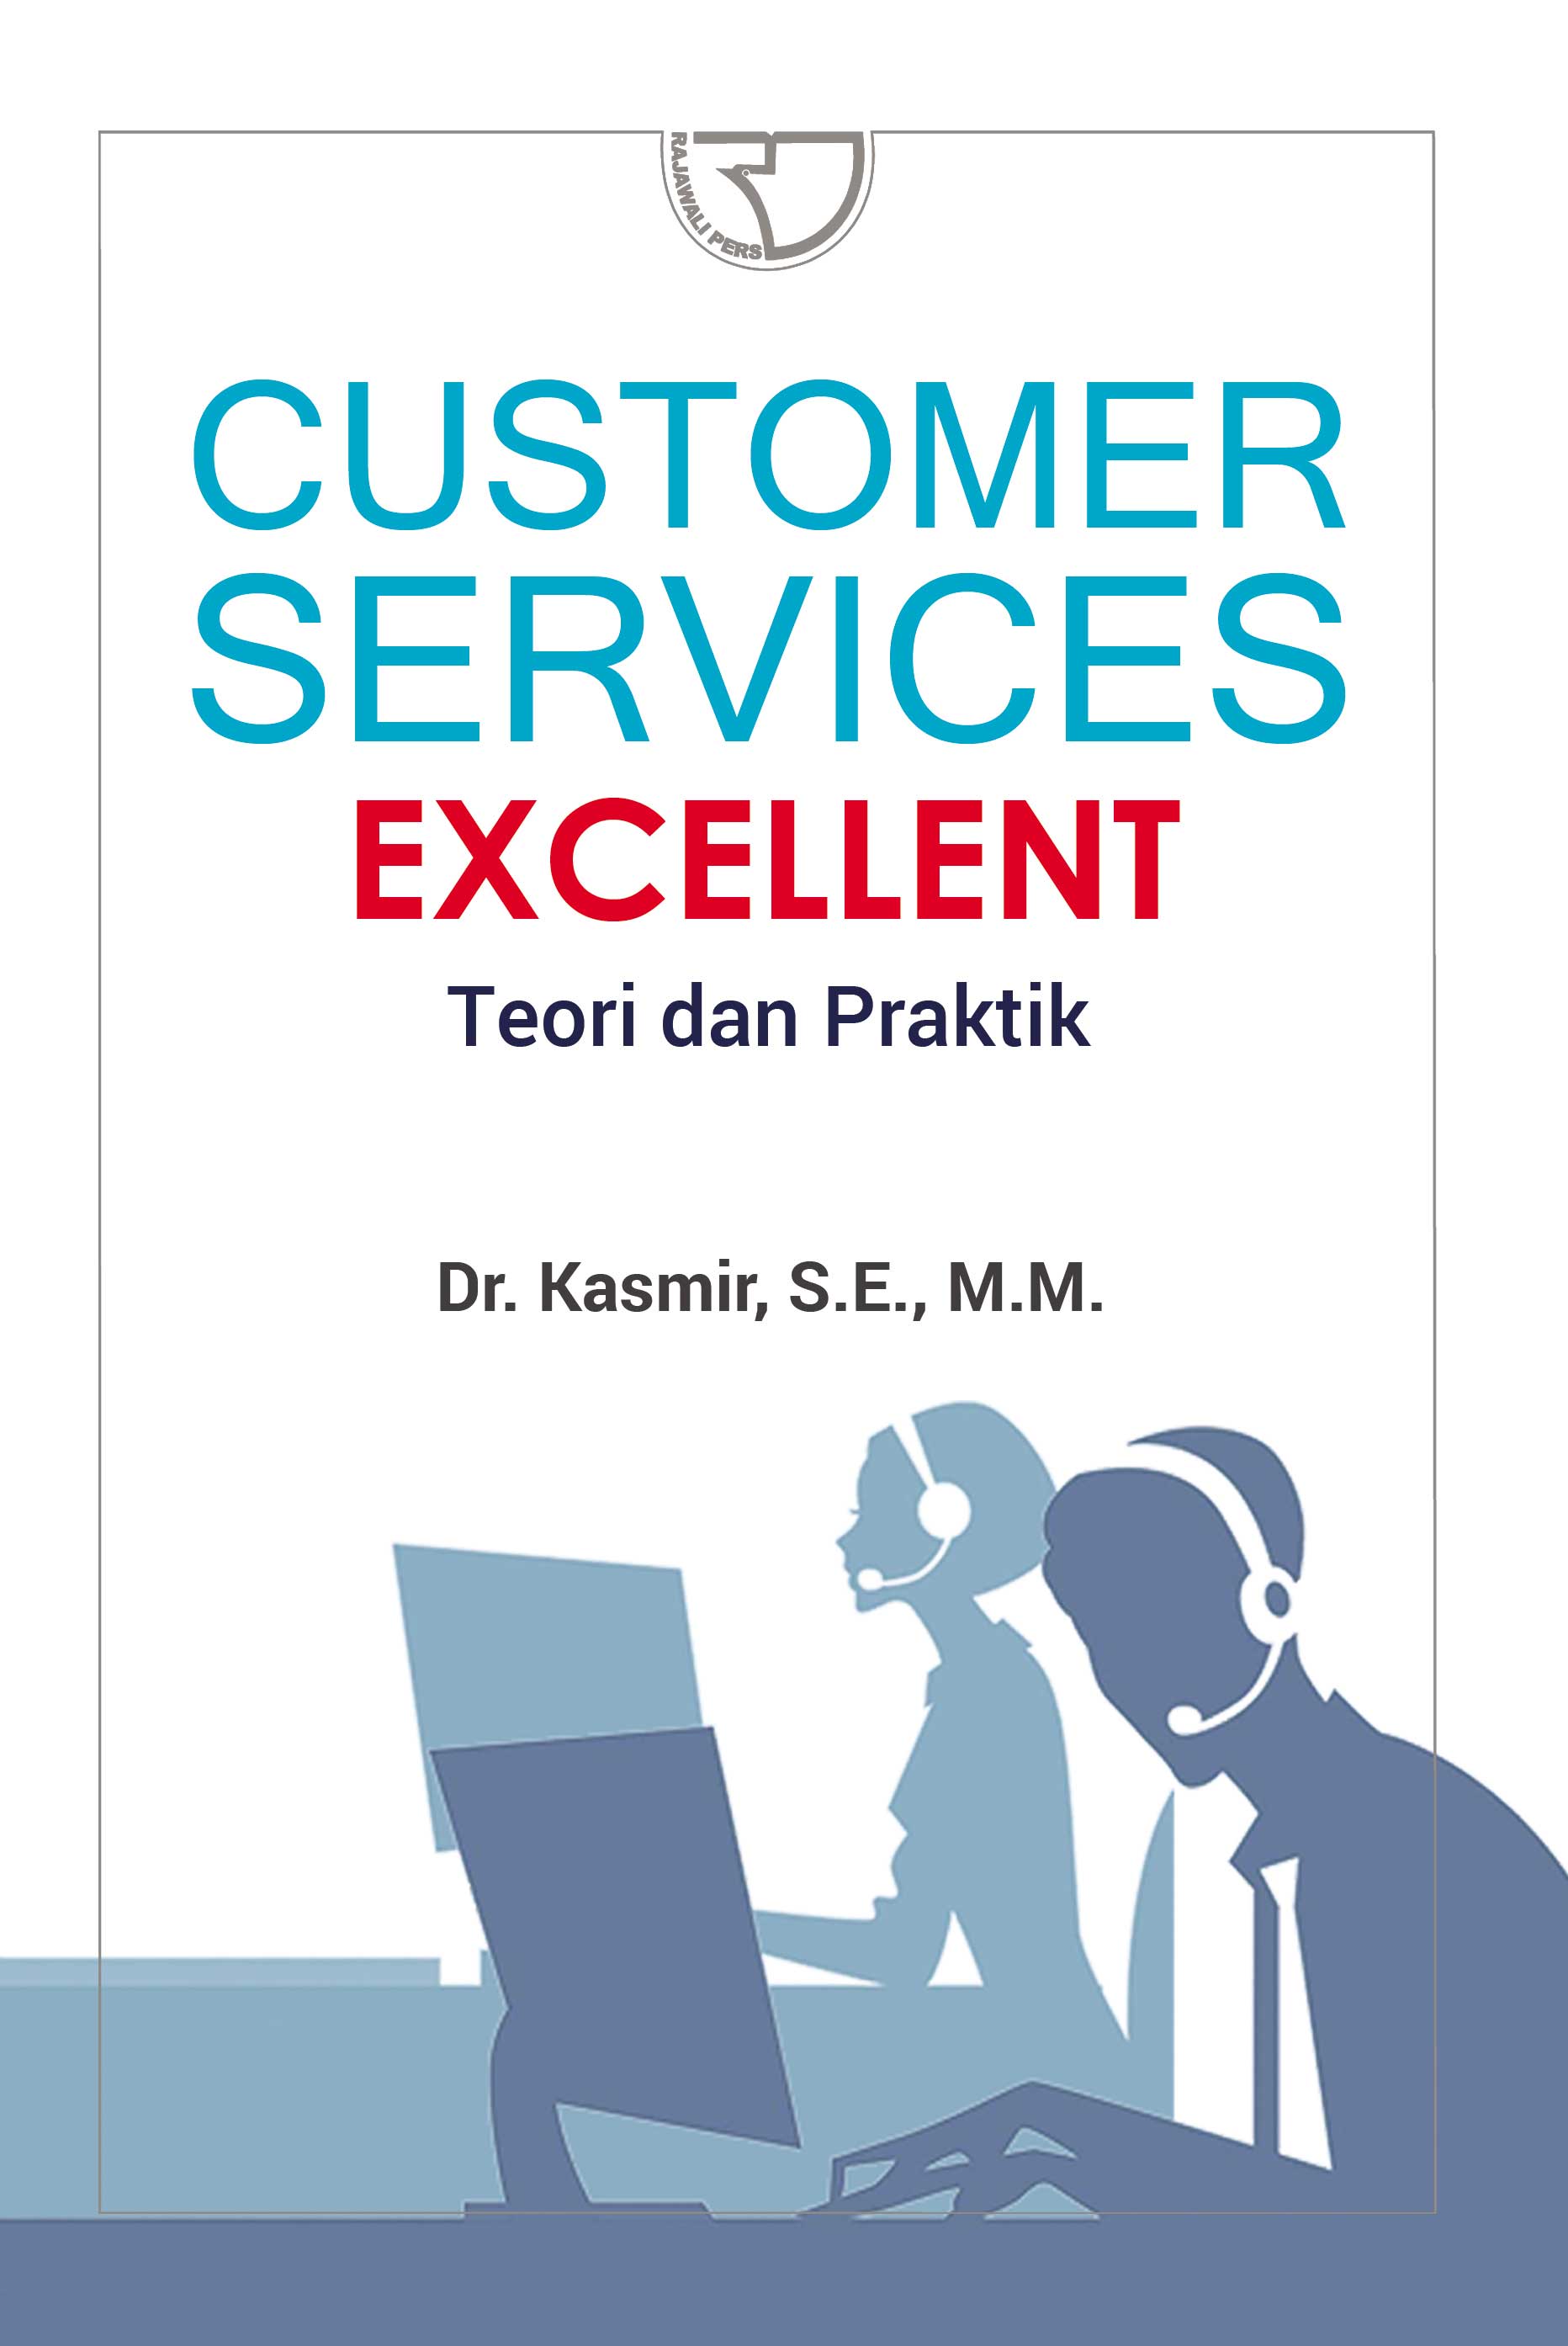 Detail Contoh Service Excellence Nomer 20